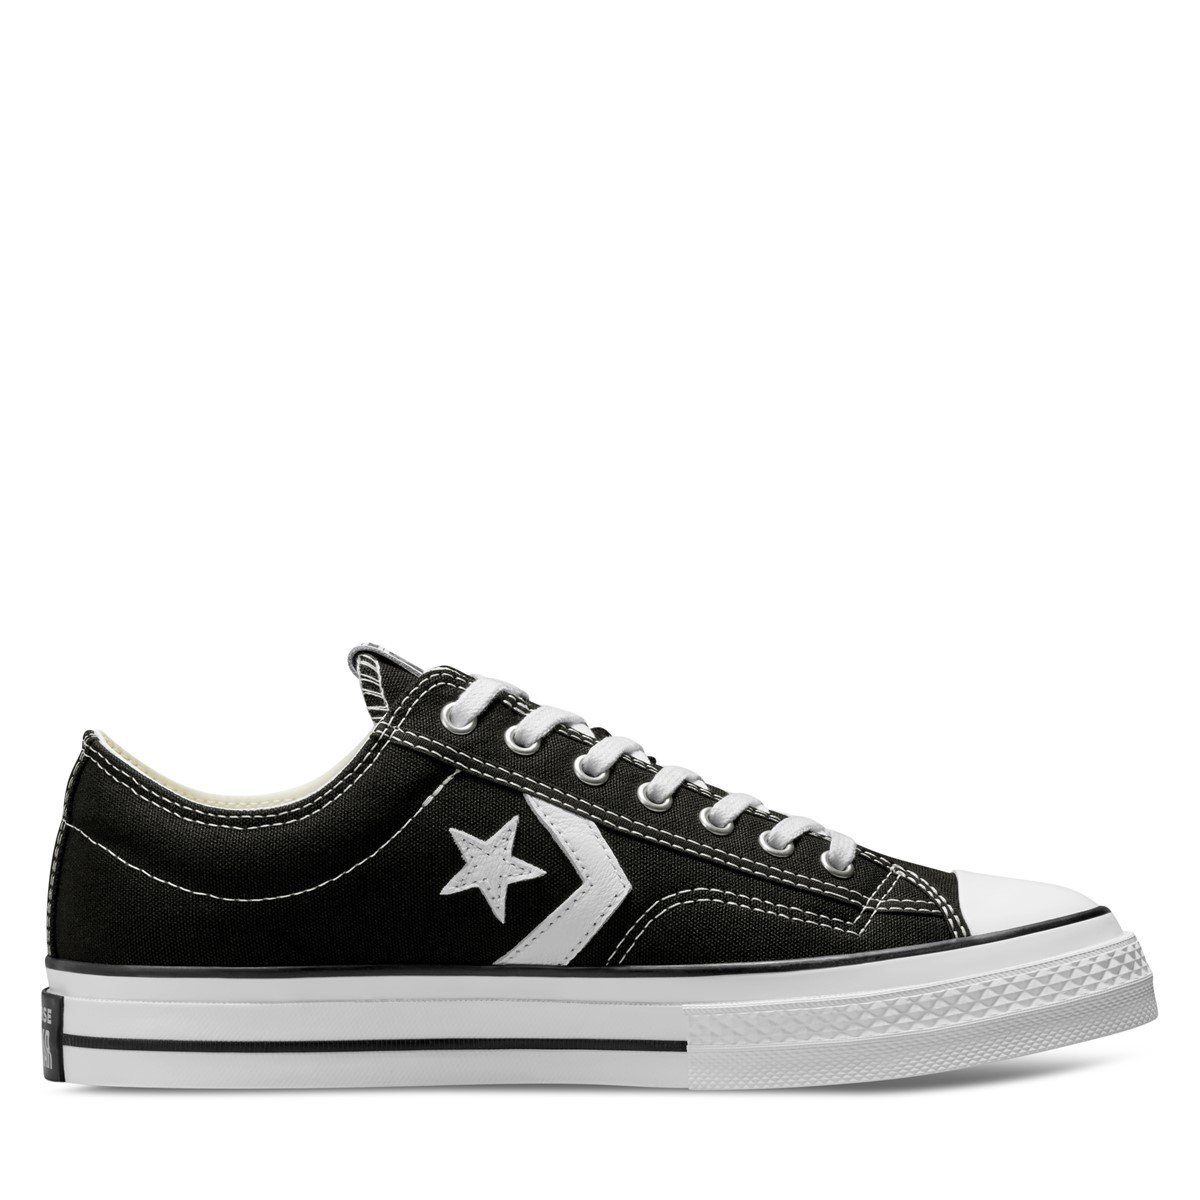 Star Player 76 Sneakers in Black/White